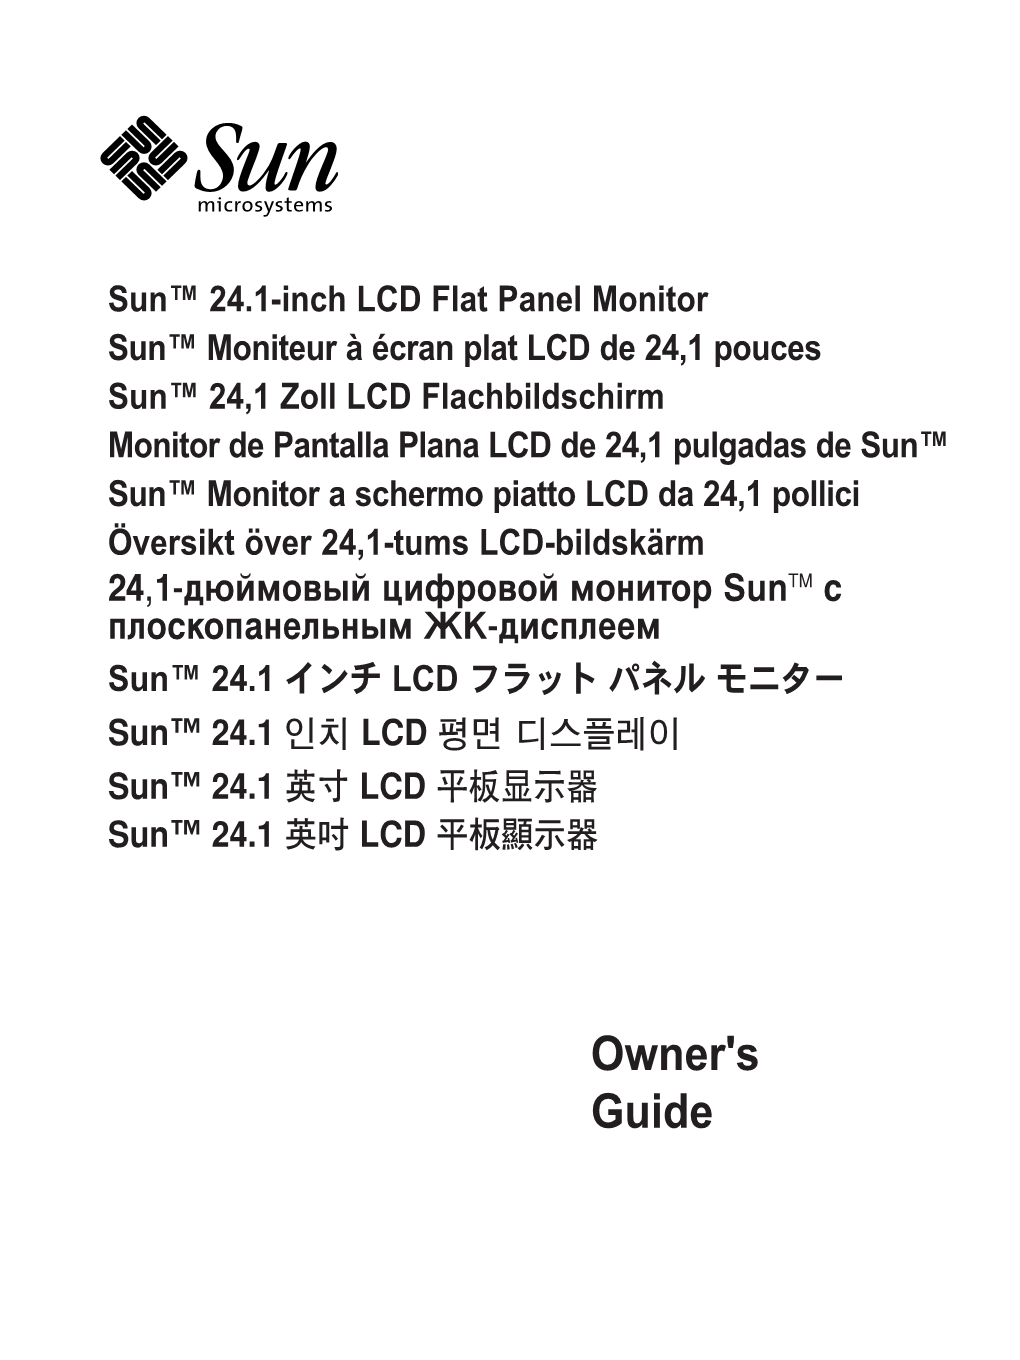 24.1-Inch LCD Flat Panel Monitor Owner's Guide